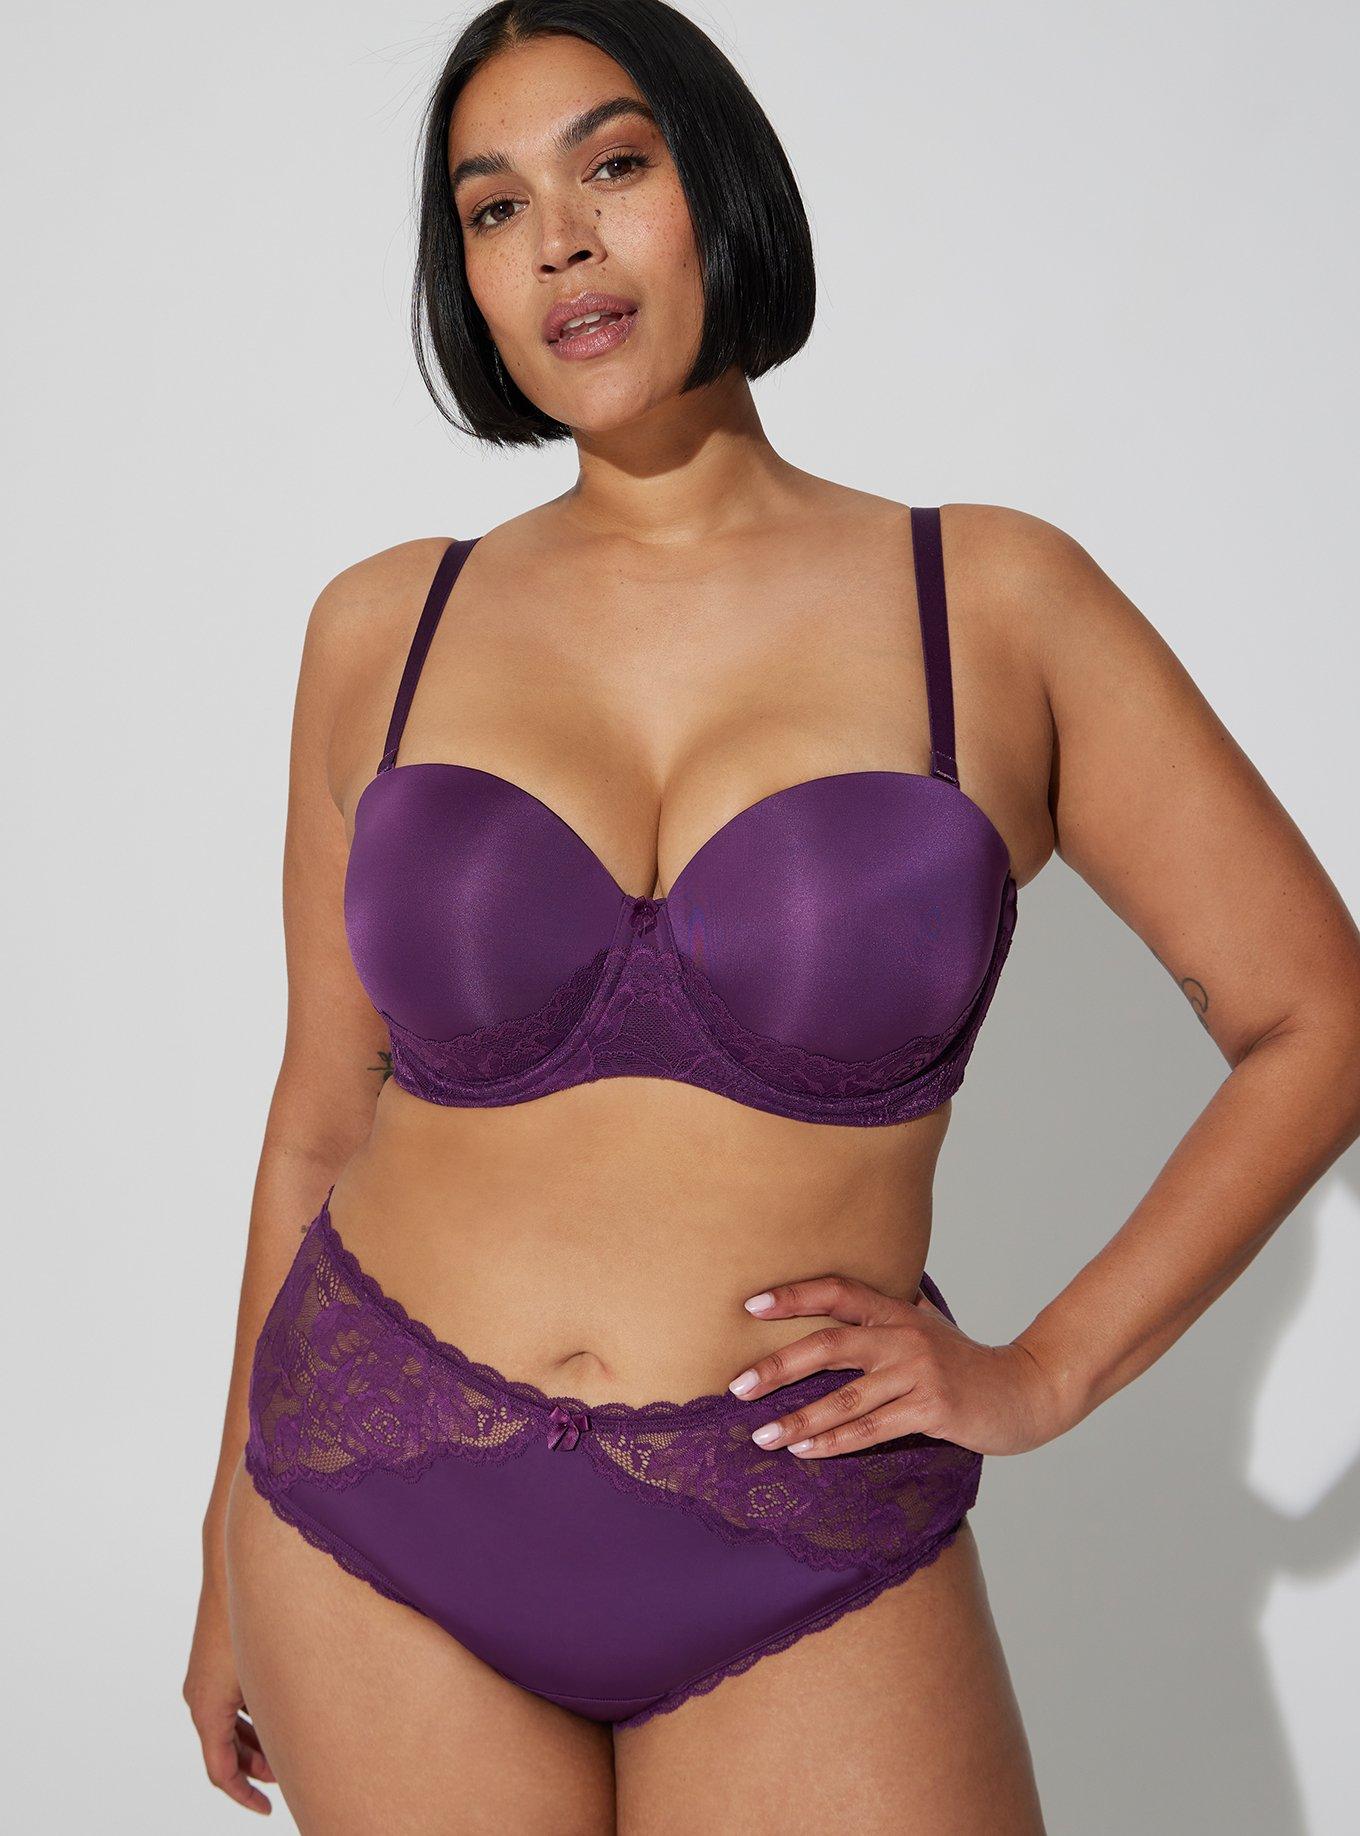 BIG BUST Full Coverage Underwire Plum BRA, Cotton Lined European Purple Lace  Bra, New Old Stock, Holiday Gift for Her, Gift for Girlfriend -  Canada